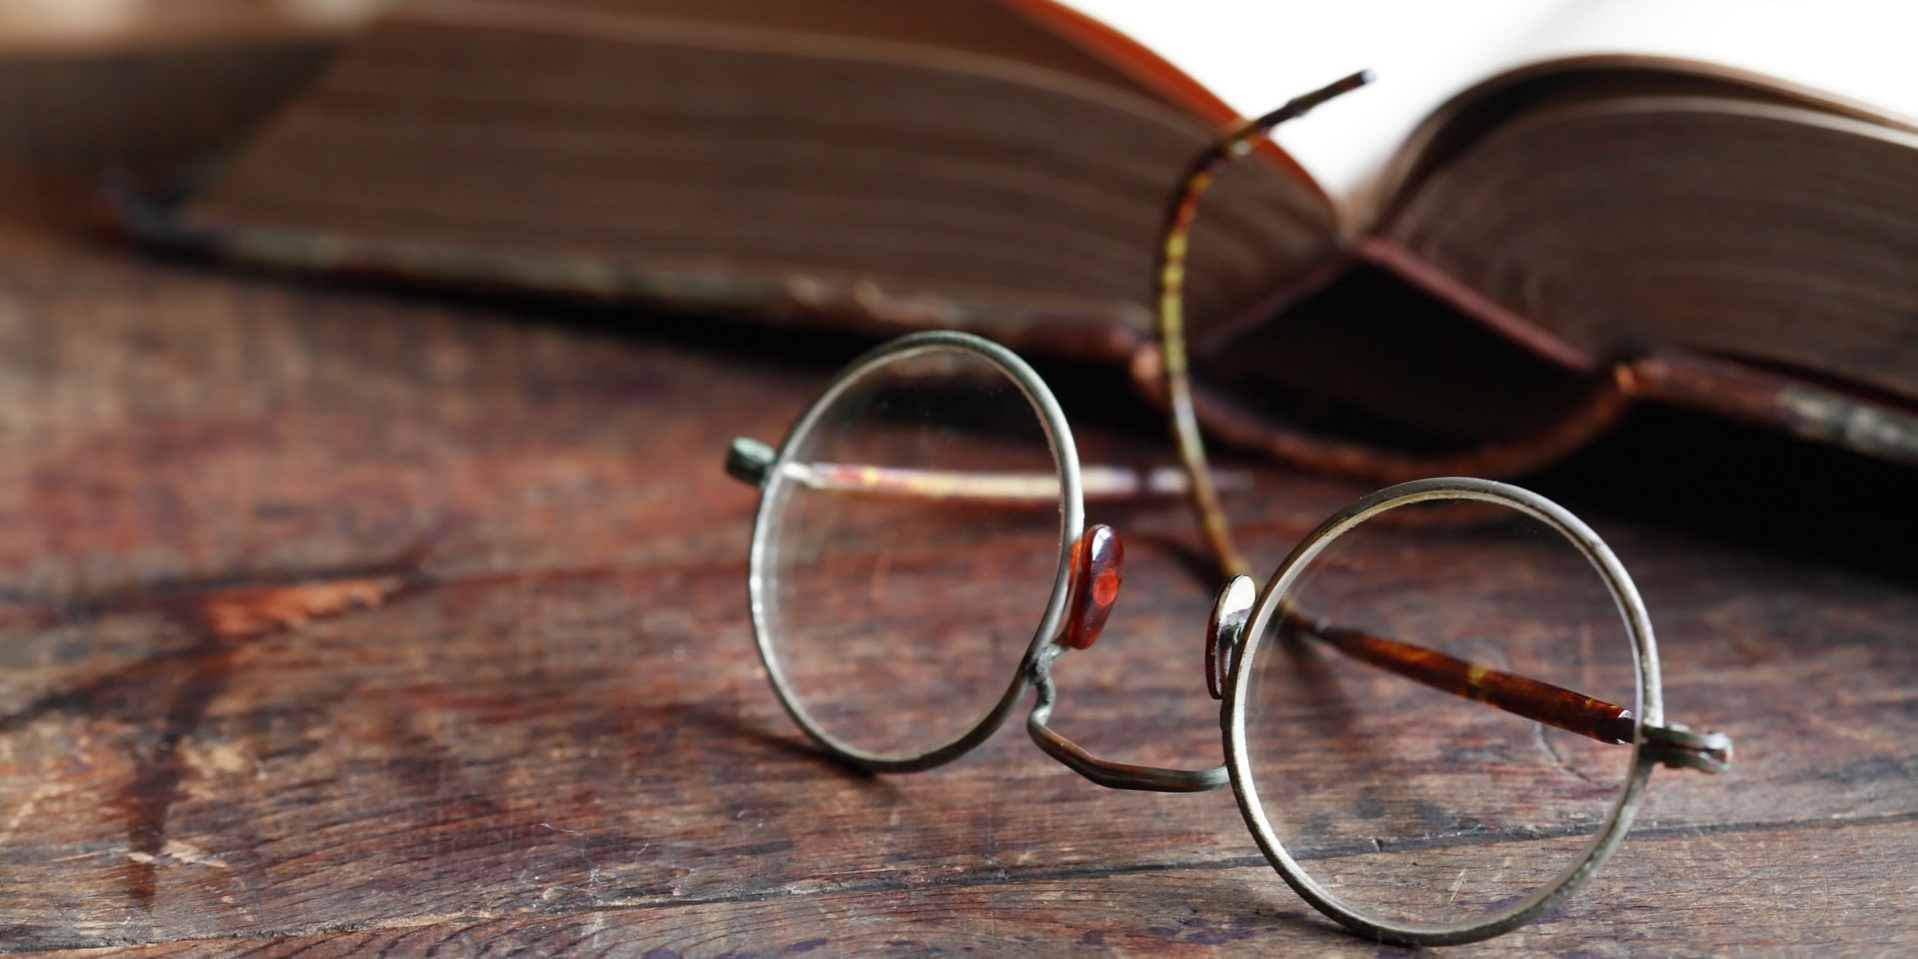 Pair of eyeglasses in front of a book